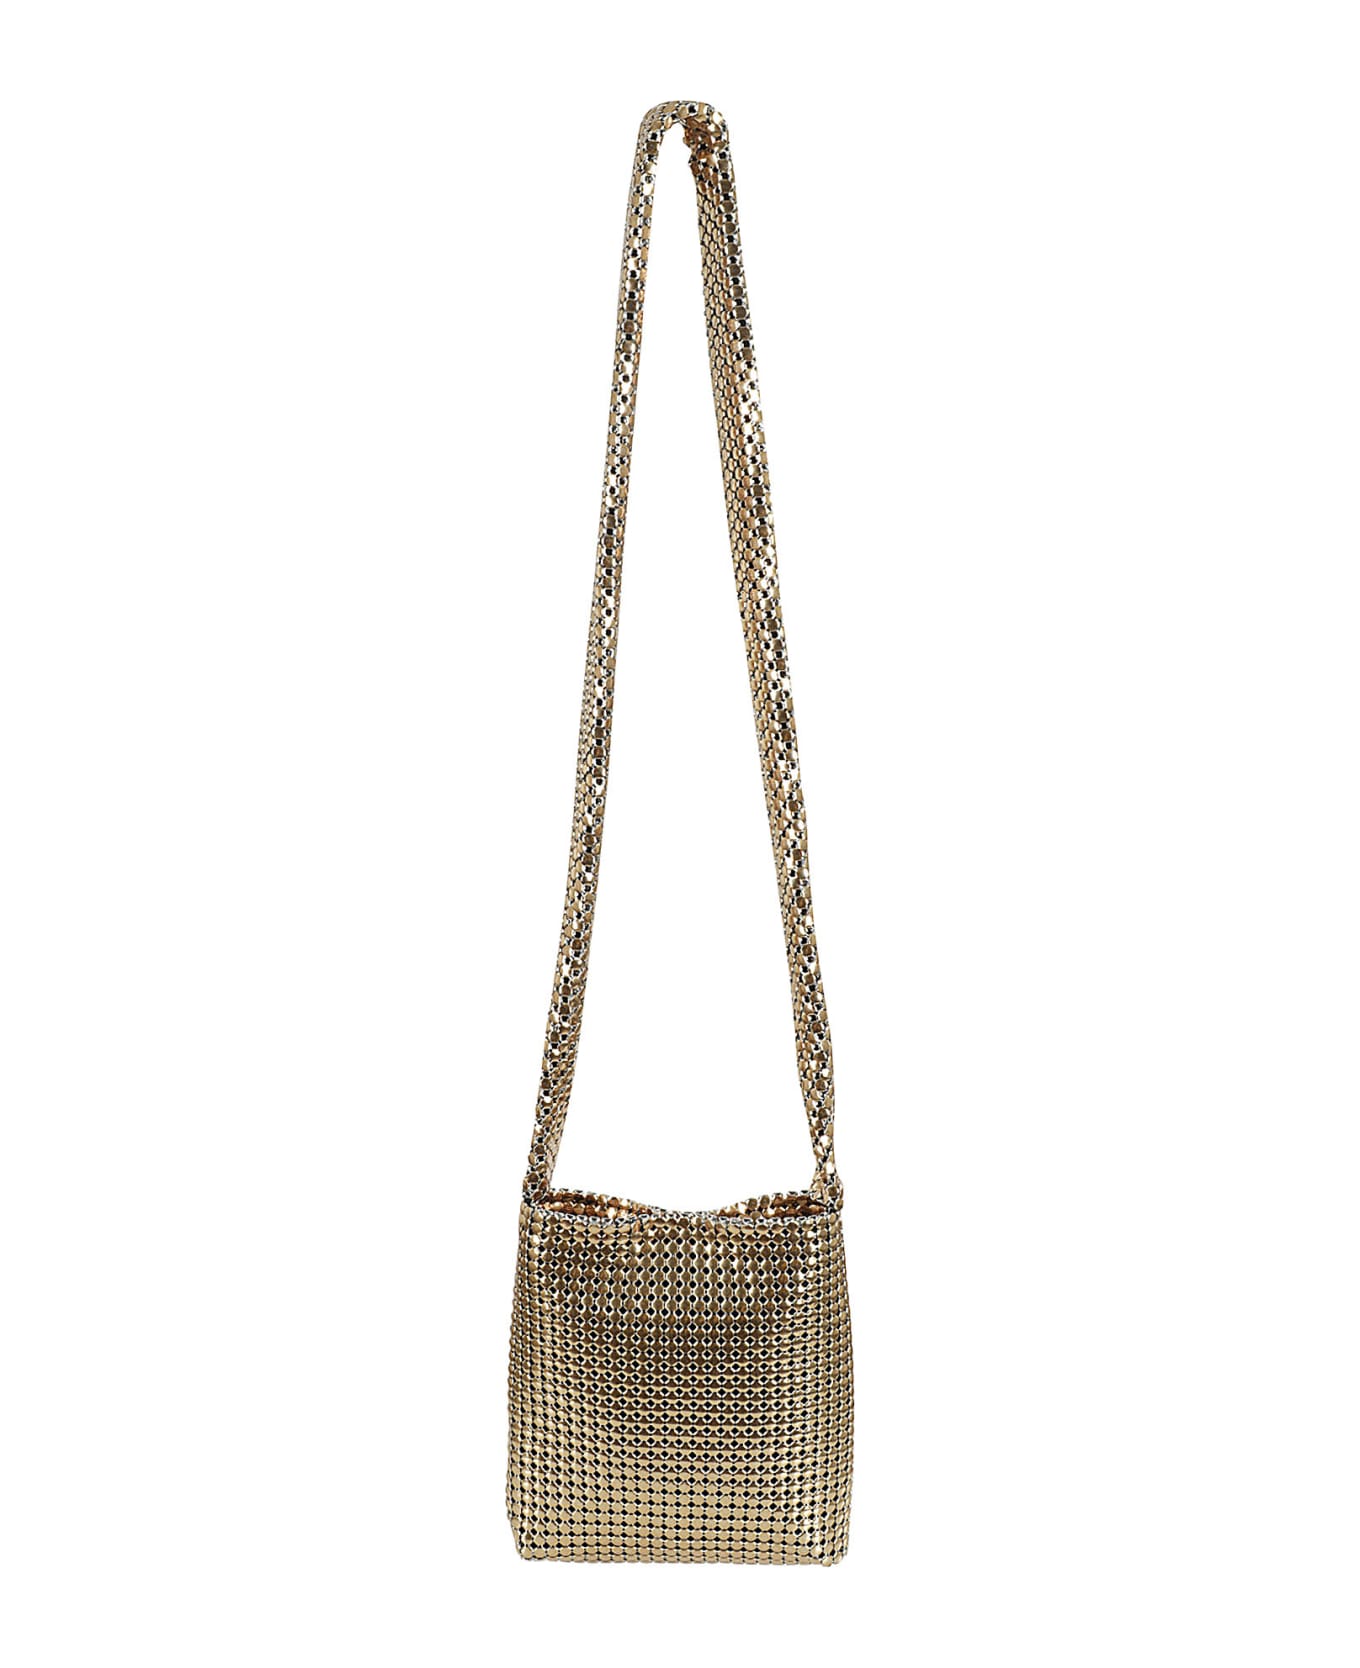 Paco Rabanne Sac Bandouliere - Gold